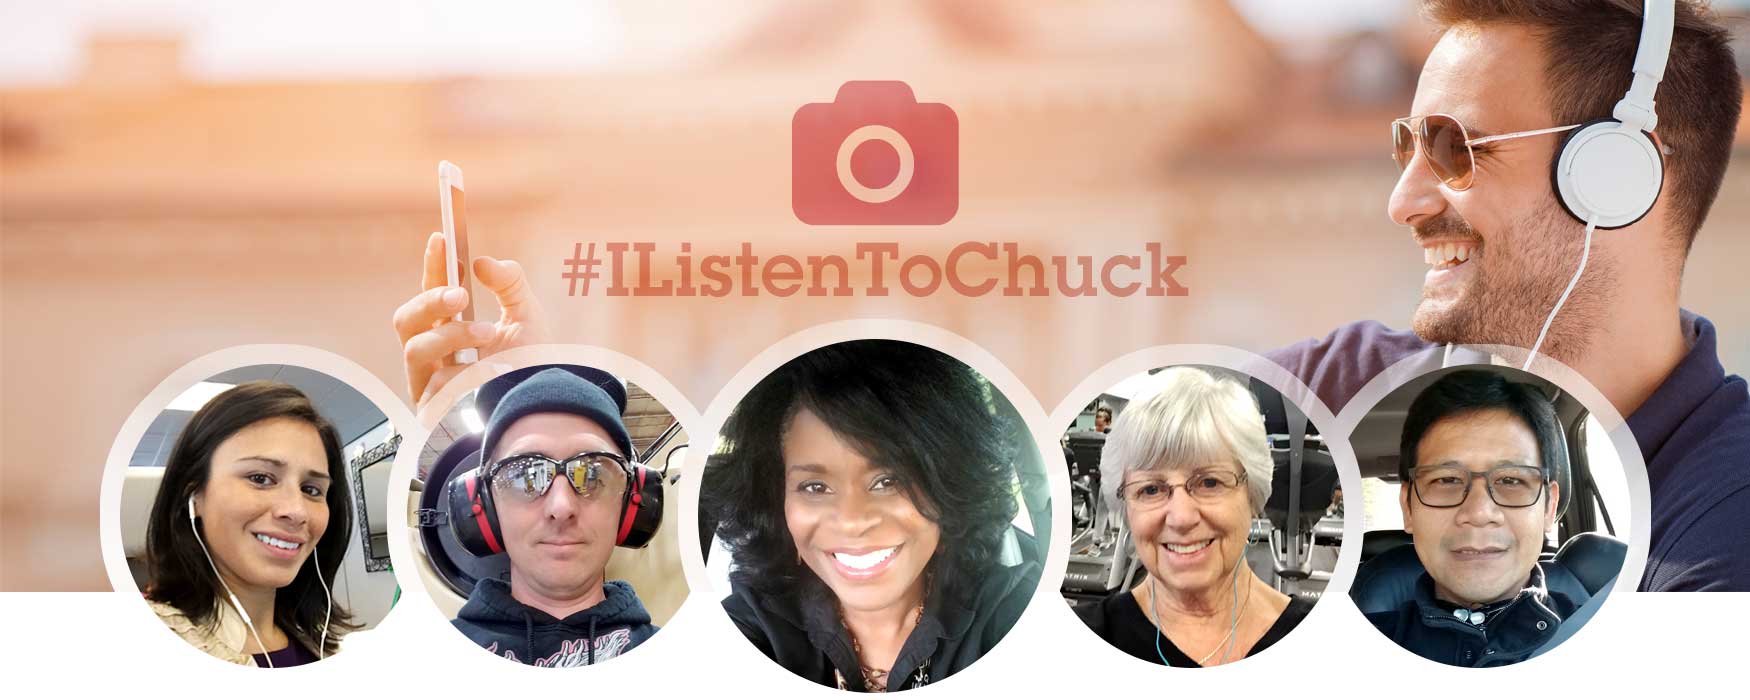 Upload a photo showing how you listen to Chuck Swindoll